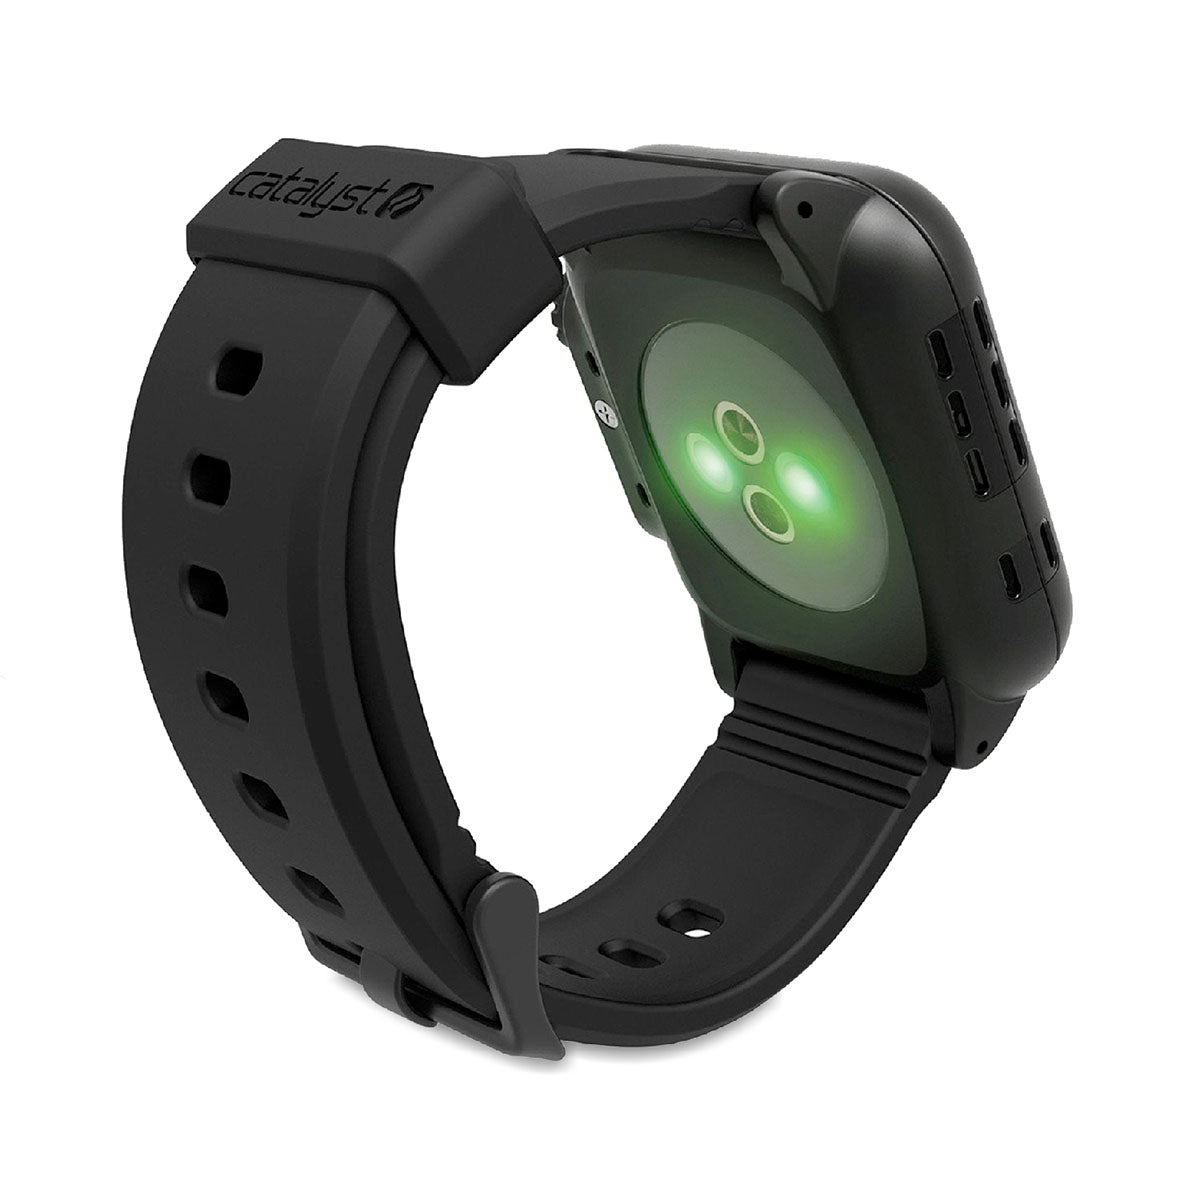 catalyst apple watch series 3 42mm waterproof case band showing the back of the catalyst case with green lights on the optic sensor